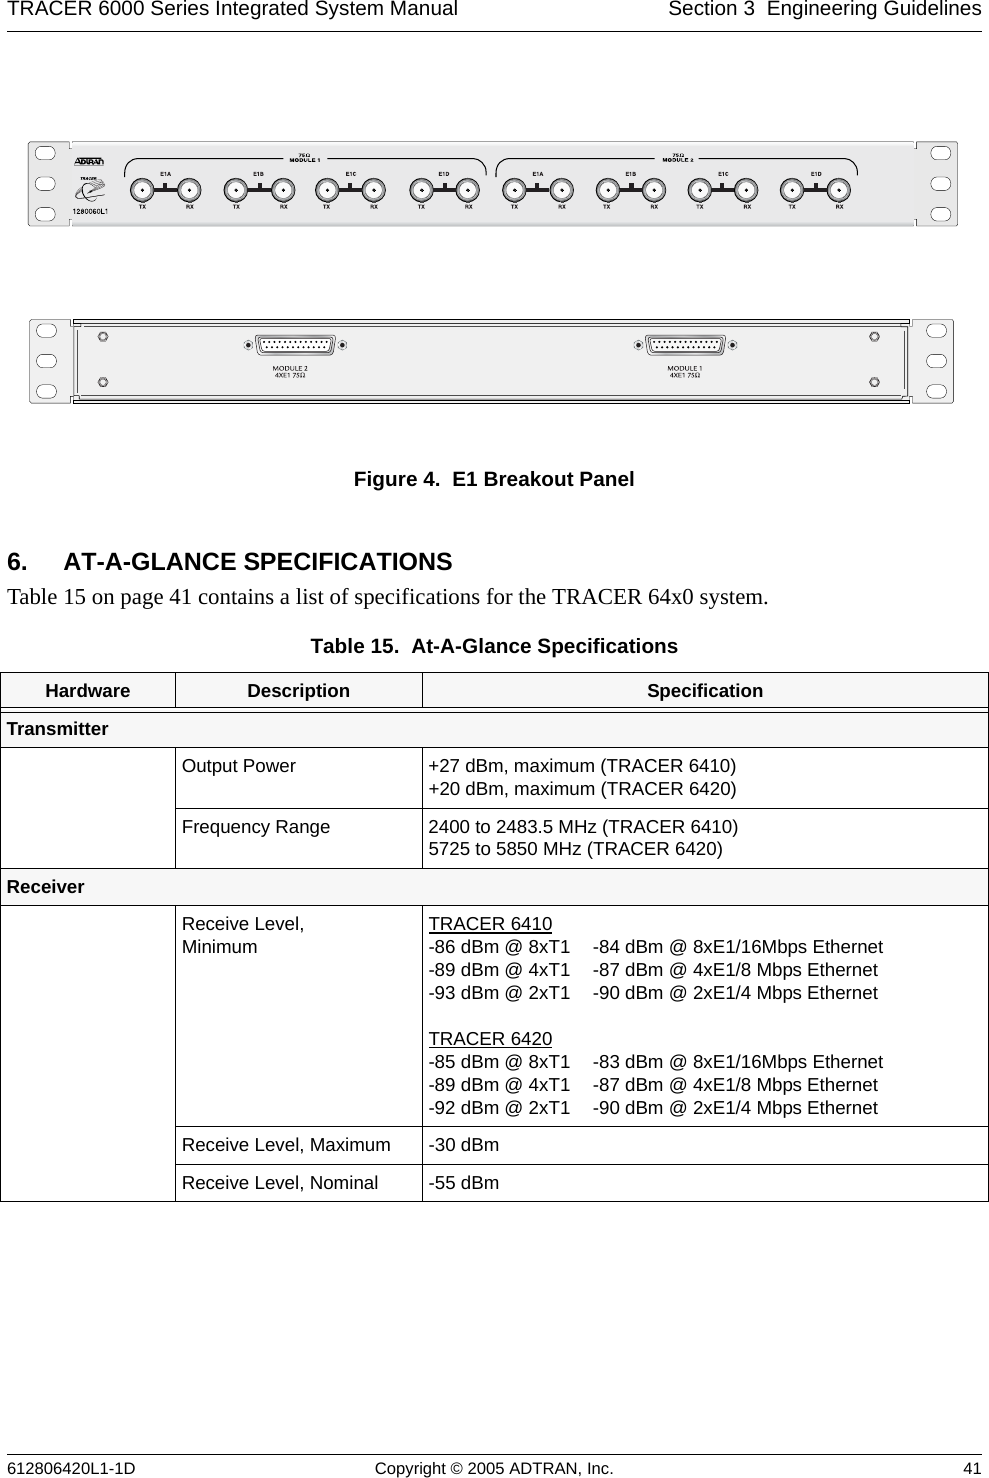 TRACER 6000 Series Integrated System Manual Section 3  Engineering Guidelines612806420L1-1D Copyright © 2005 ADTRAN, Inc. 41Figure 4.  E1 Breakout Panel6. AT-A-GLANCE SPECIFICATIONSTable 15 on page 41 contains a list of specifications for the TRACER 64x0 system.Table 15.  At-A-Glance Specifications  Hardware Description SpecificationTransmitterOutput Power +27 dBm, maximum (TRACER 6410)+20 dBm, maximum (TRACER 6420)Frequency Range 2400 to 2483.5 MHz (TRACER 6410)5725 to 5850 MHz (TRACER 6420)ReceiverReceive Level, Minimum TRACER 6410-86 dBm @ 8xT1 -89 dBm @ 4xT1-93 dBm @ 2xT1TRACER 6420-85 dBm @ 8xT1 -89 dBm @ 4xT1-92 dBm @ 2xT1-84 dBm @ 8xE1/16Mbps Ethernet-87 dBm @ 4xE1/8 Mbps Ethernet-90 dBm @ 2xE1/4 Mbps Ethernet-83 dBm @ 8xE1/16Mbps Ethernet-87 dBm @ 4xE1/8 Mbps Ethernet-90 dBm @ 2xE1/4 Mbps EthernetReceive Level, Maximum -30 dBm Receive Level, Nominal -55 dBm 